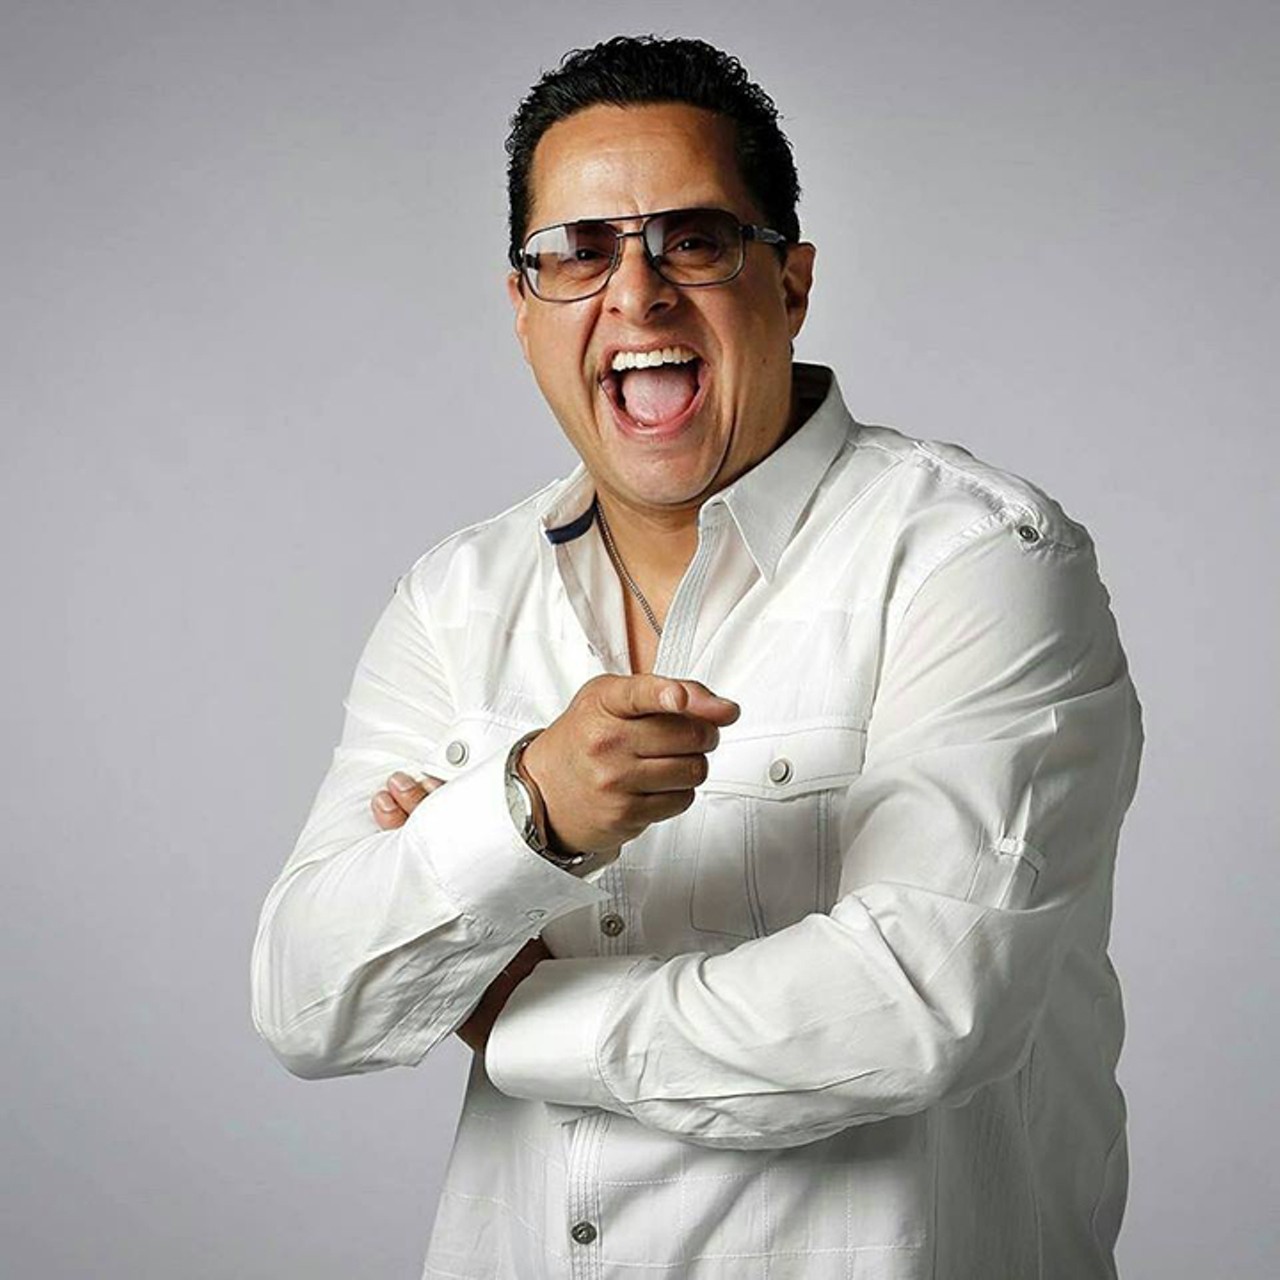 Sunday, July 23Tito Puente Jr. at the Dr. Phillips Center